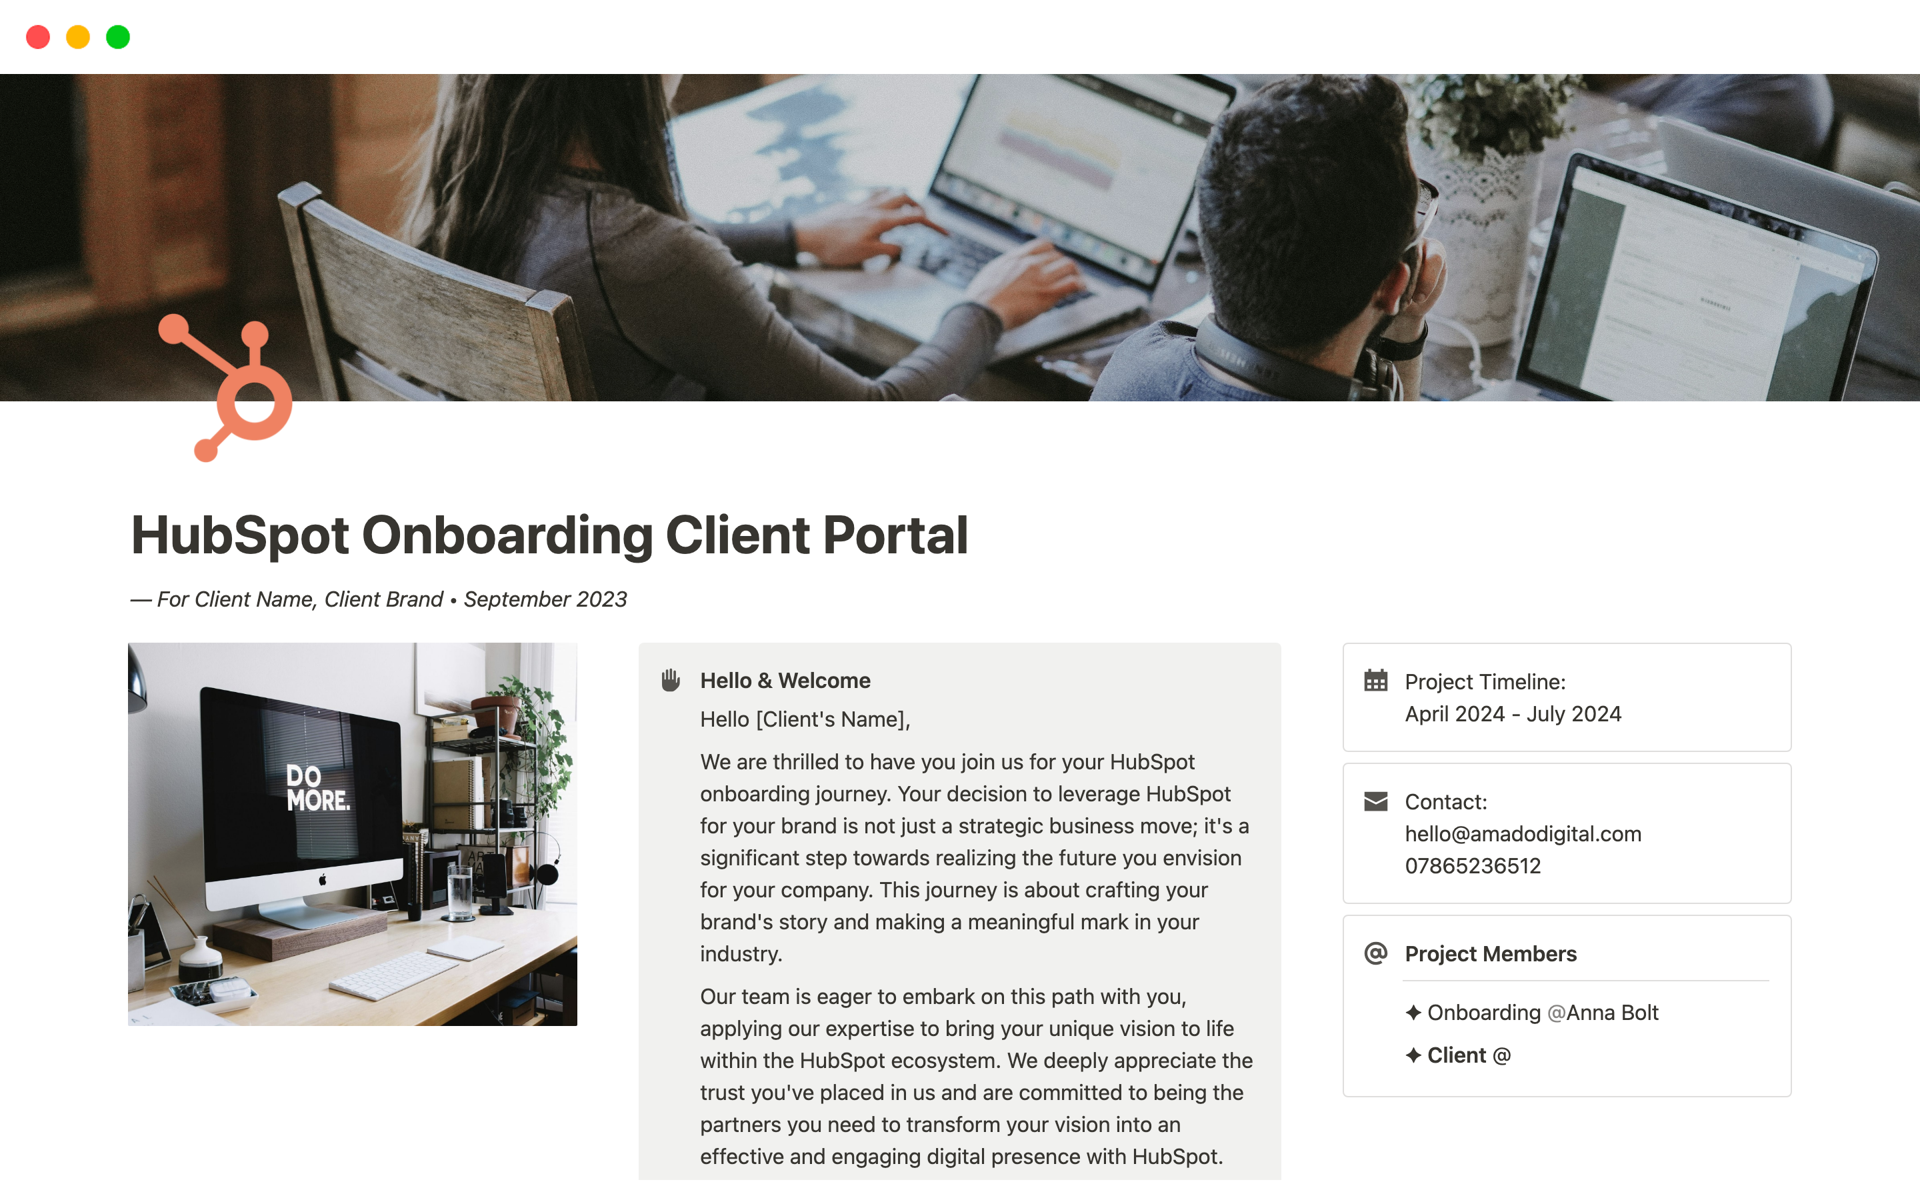 A comprehensive, streamlined HubSpot onboarding experience with tools for data mapping, training, and ongoing support, all easily shareable within your team.

